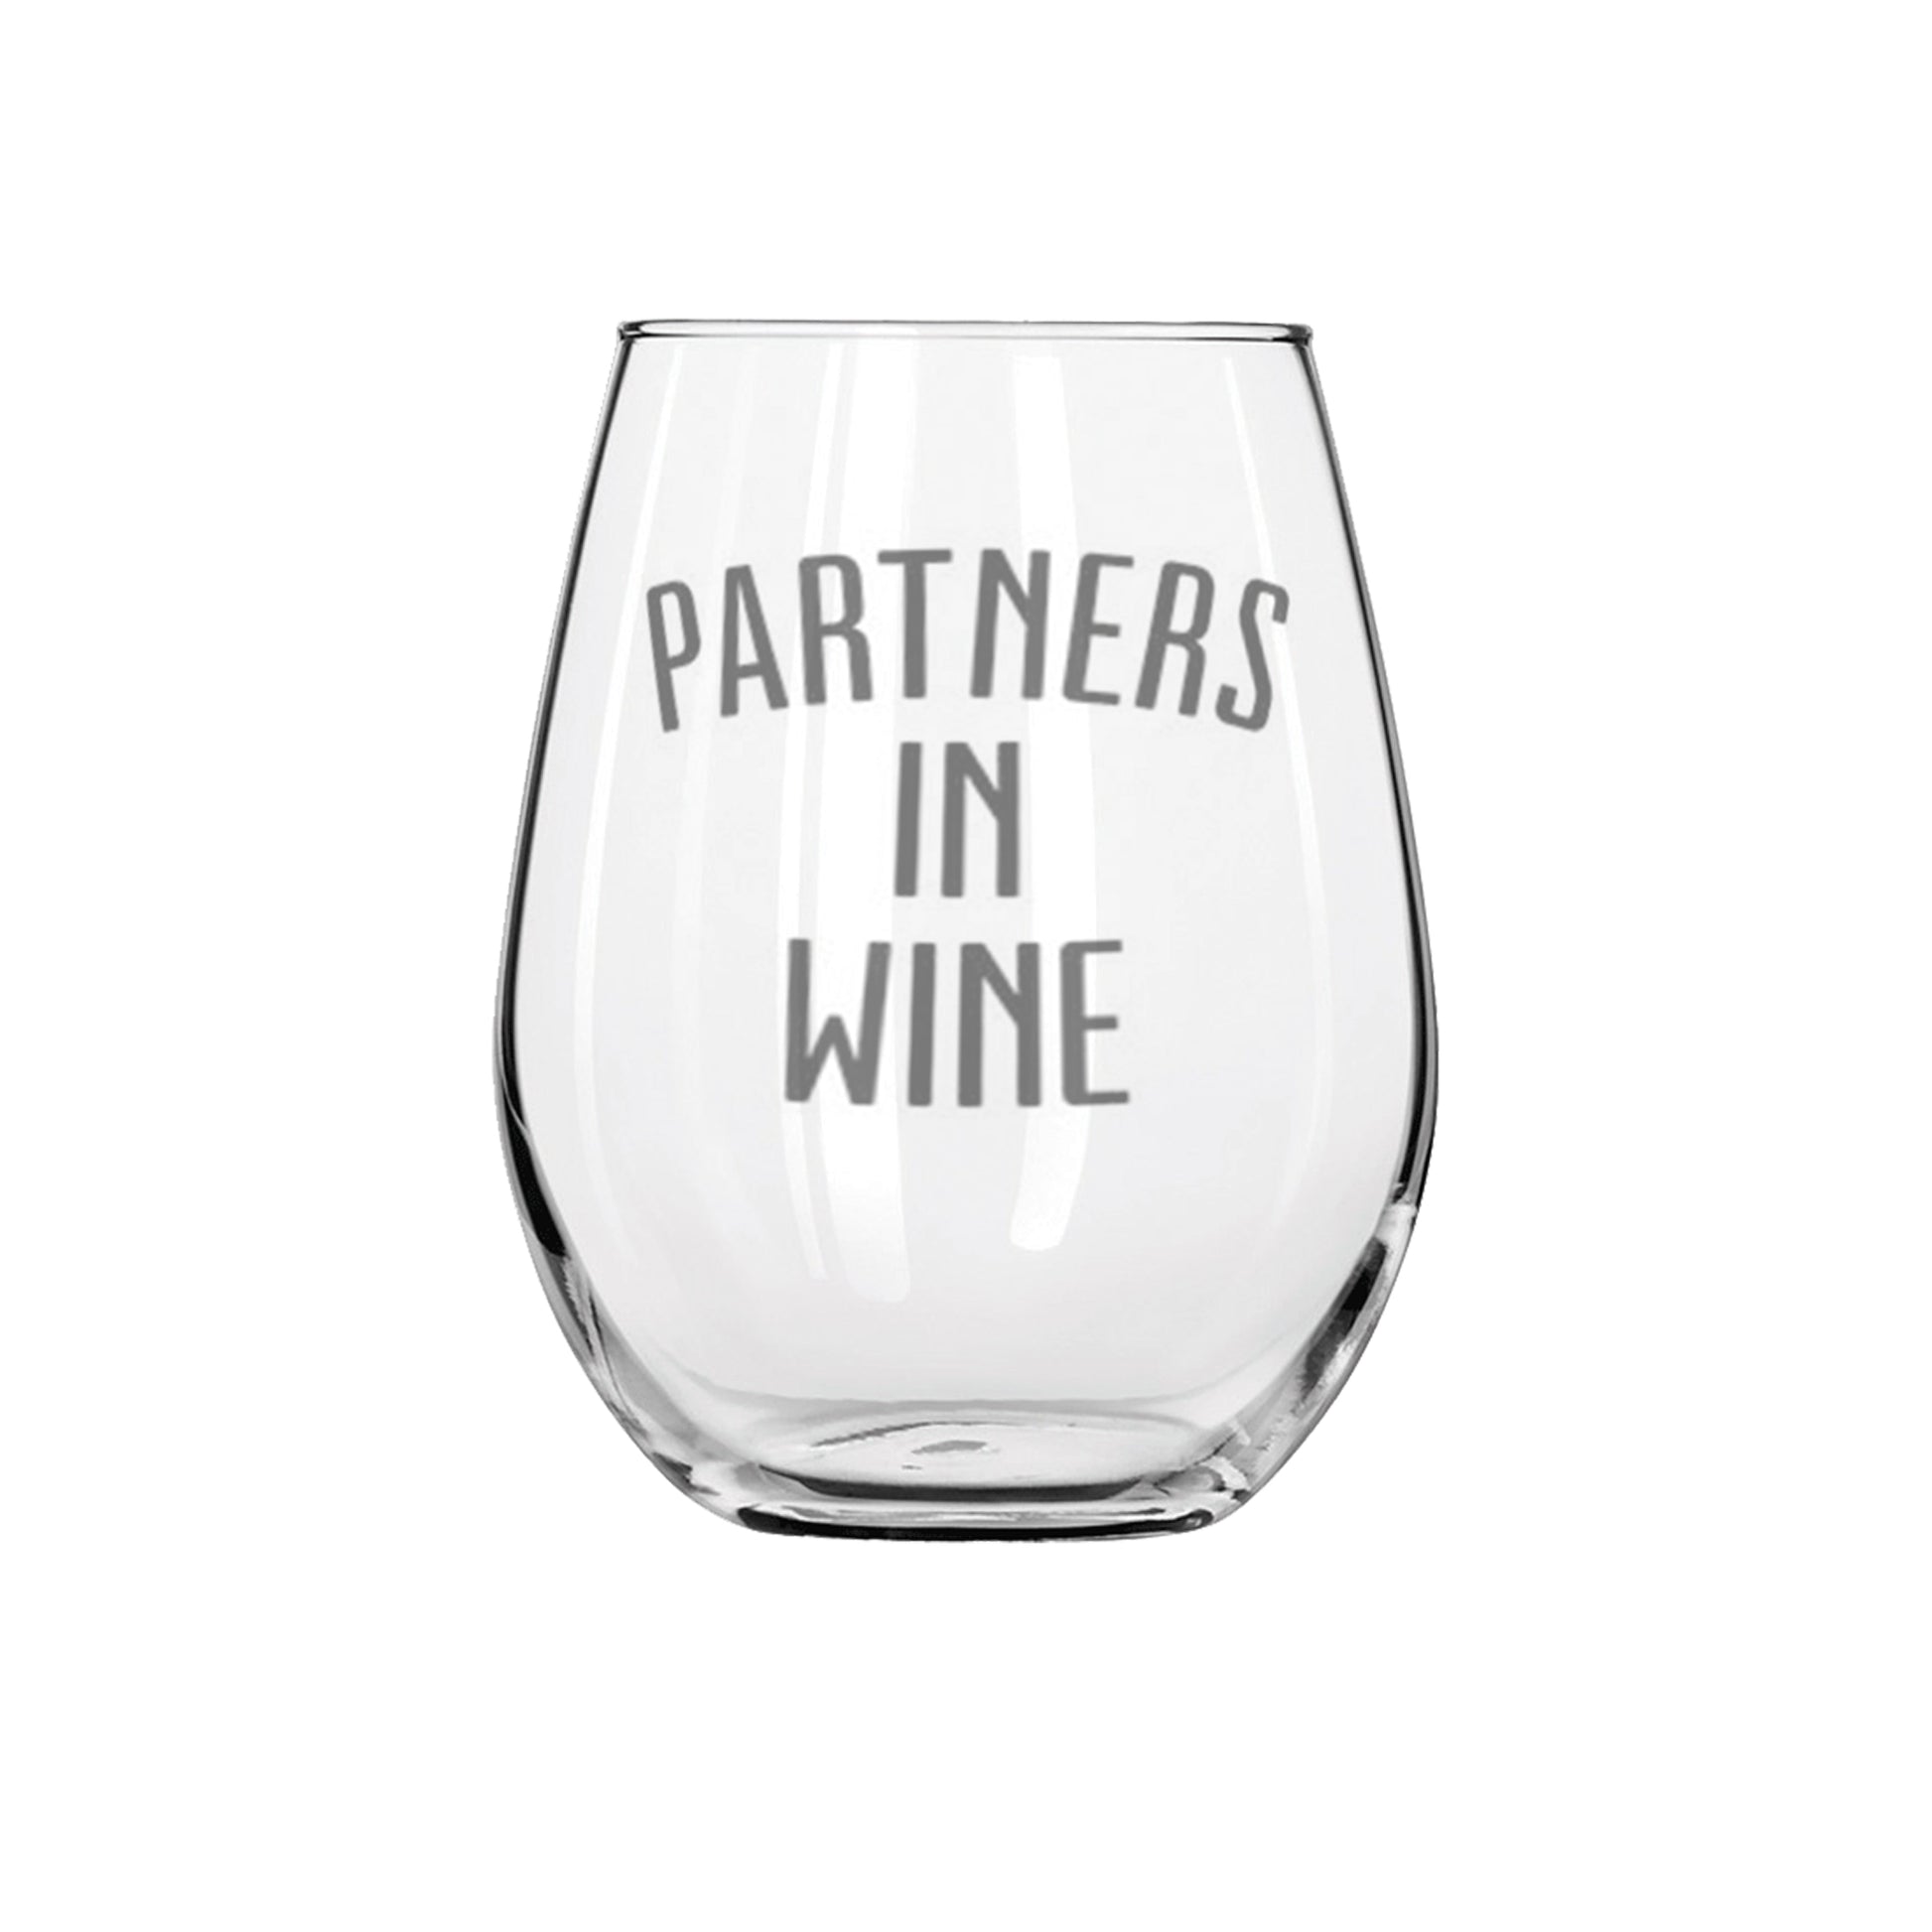 Partners in Wine Etched Stemless Wine Glass 20.5oz - Expressive DeZien 